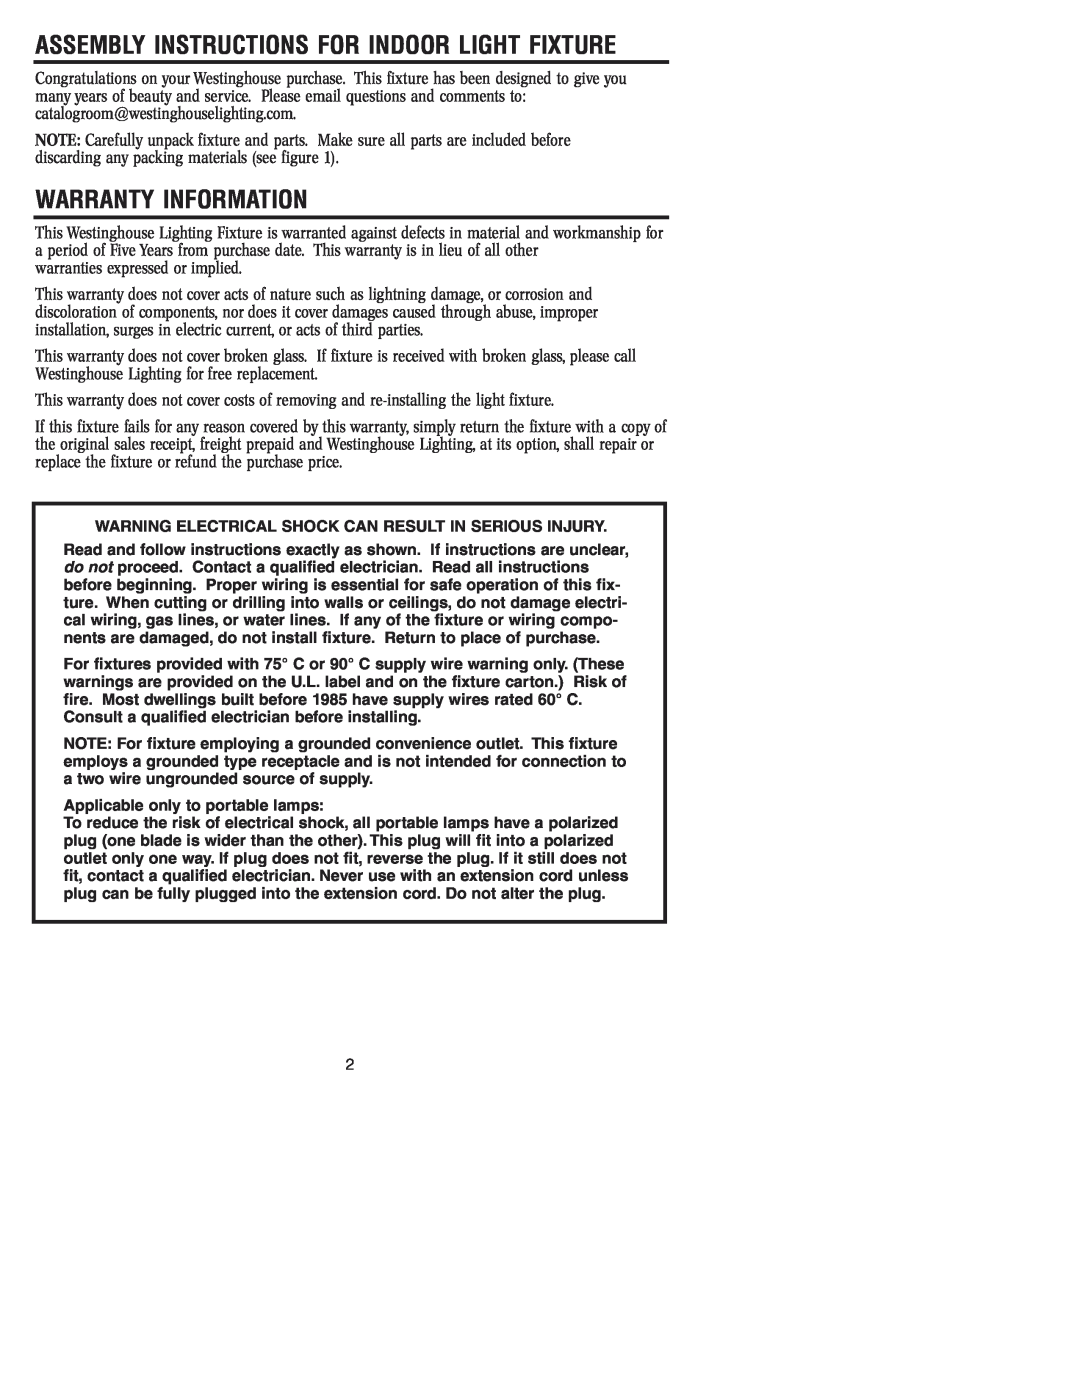 Westinghouse 81104 owner manual Warranty Information, Assembly Instructions For Indoor Light Fixture 